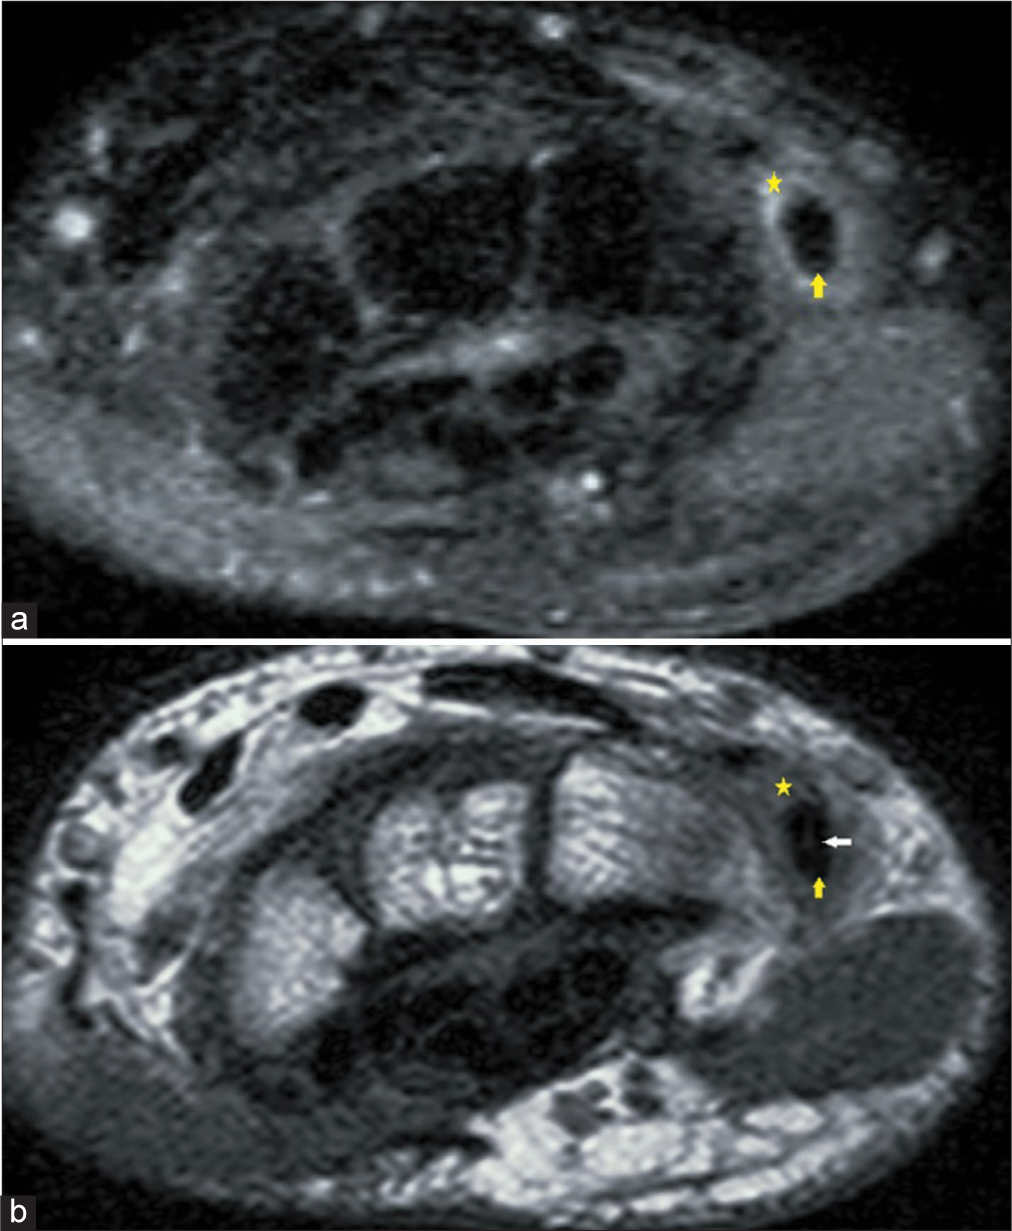 (a) Axial proton density (PD) fat-saturated magnetic resonance (MR) images of the wrist demonstrate synovial thickening with fluid in the tendon sheath of extensor carpi ulnaris (ECU) (yellow asterisk). ECU tendon (yellow arrow) demonstrates normal signal intensity. (b) T1-weighted MR images of the wrist demonstrate synovial thickening with fluid in the tendon sheath of ECU (yellow asterisk). ECU tendon (yellow arrow) demonstrates normal low-signal intensity peripherally. A small T1 isointense focus is seen within the substance of the ECU tendon (white arrow), suggesting a chronic partially healed tear.